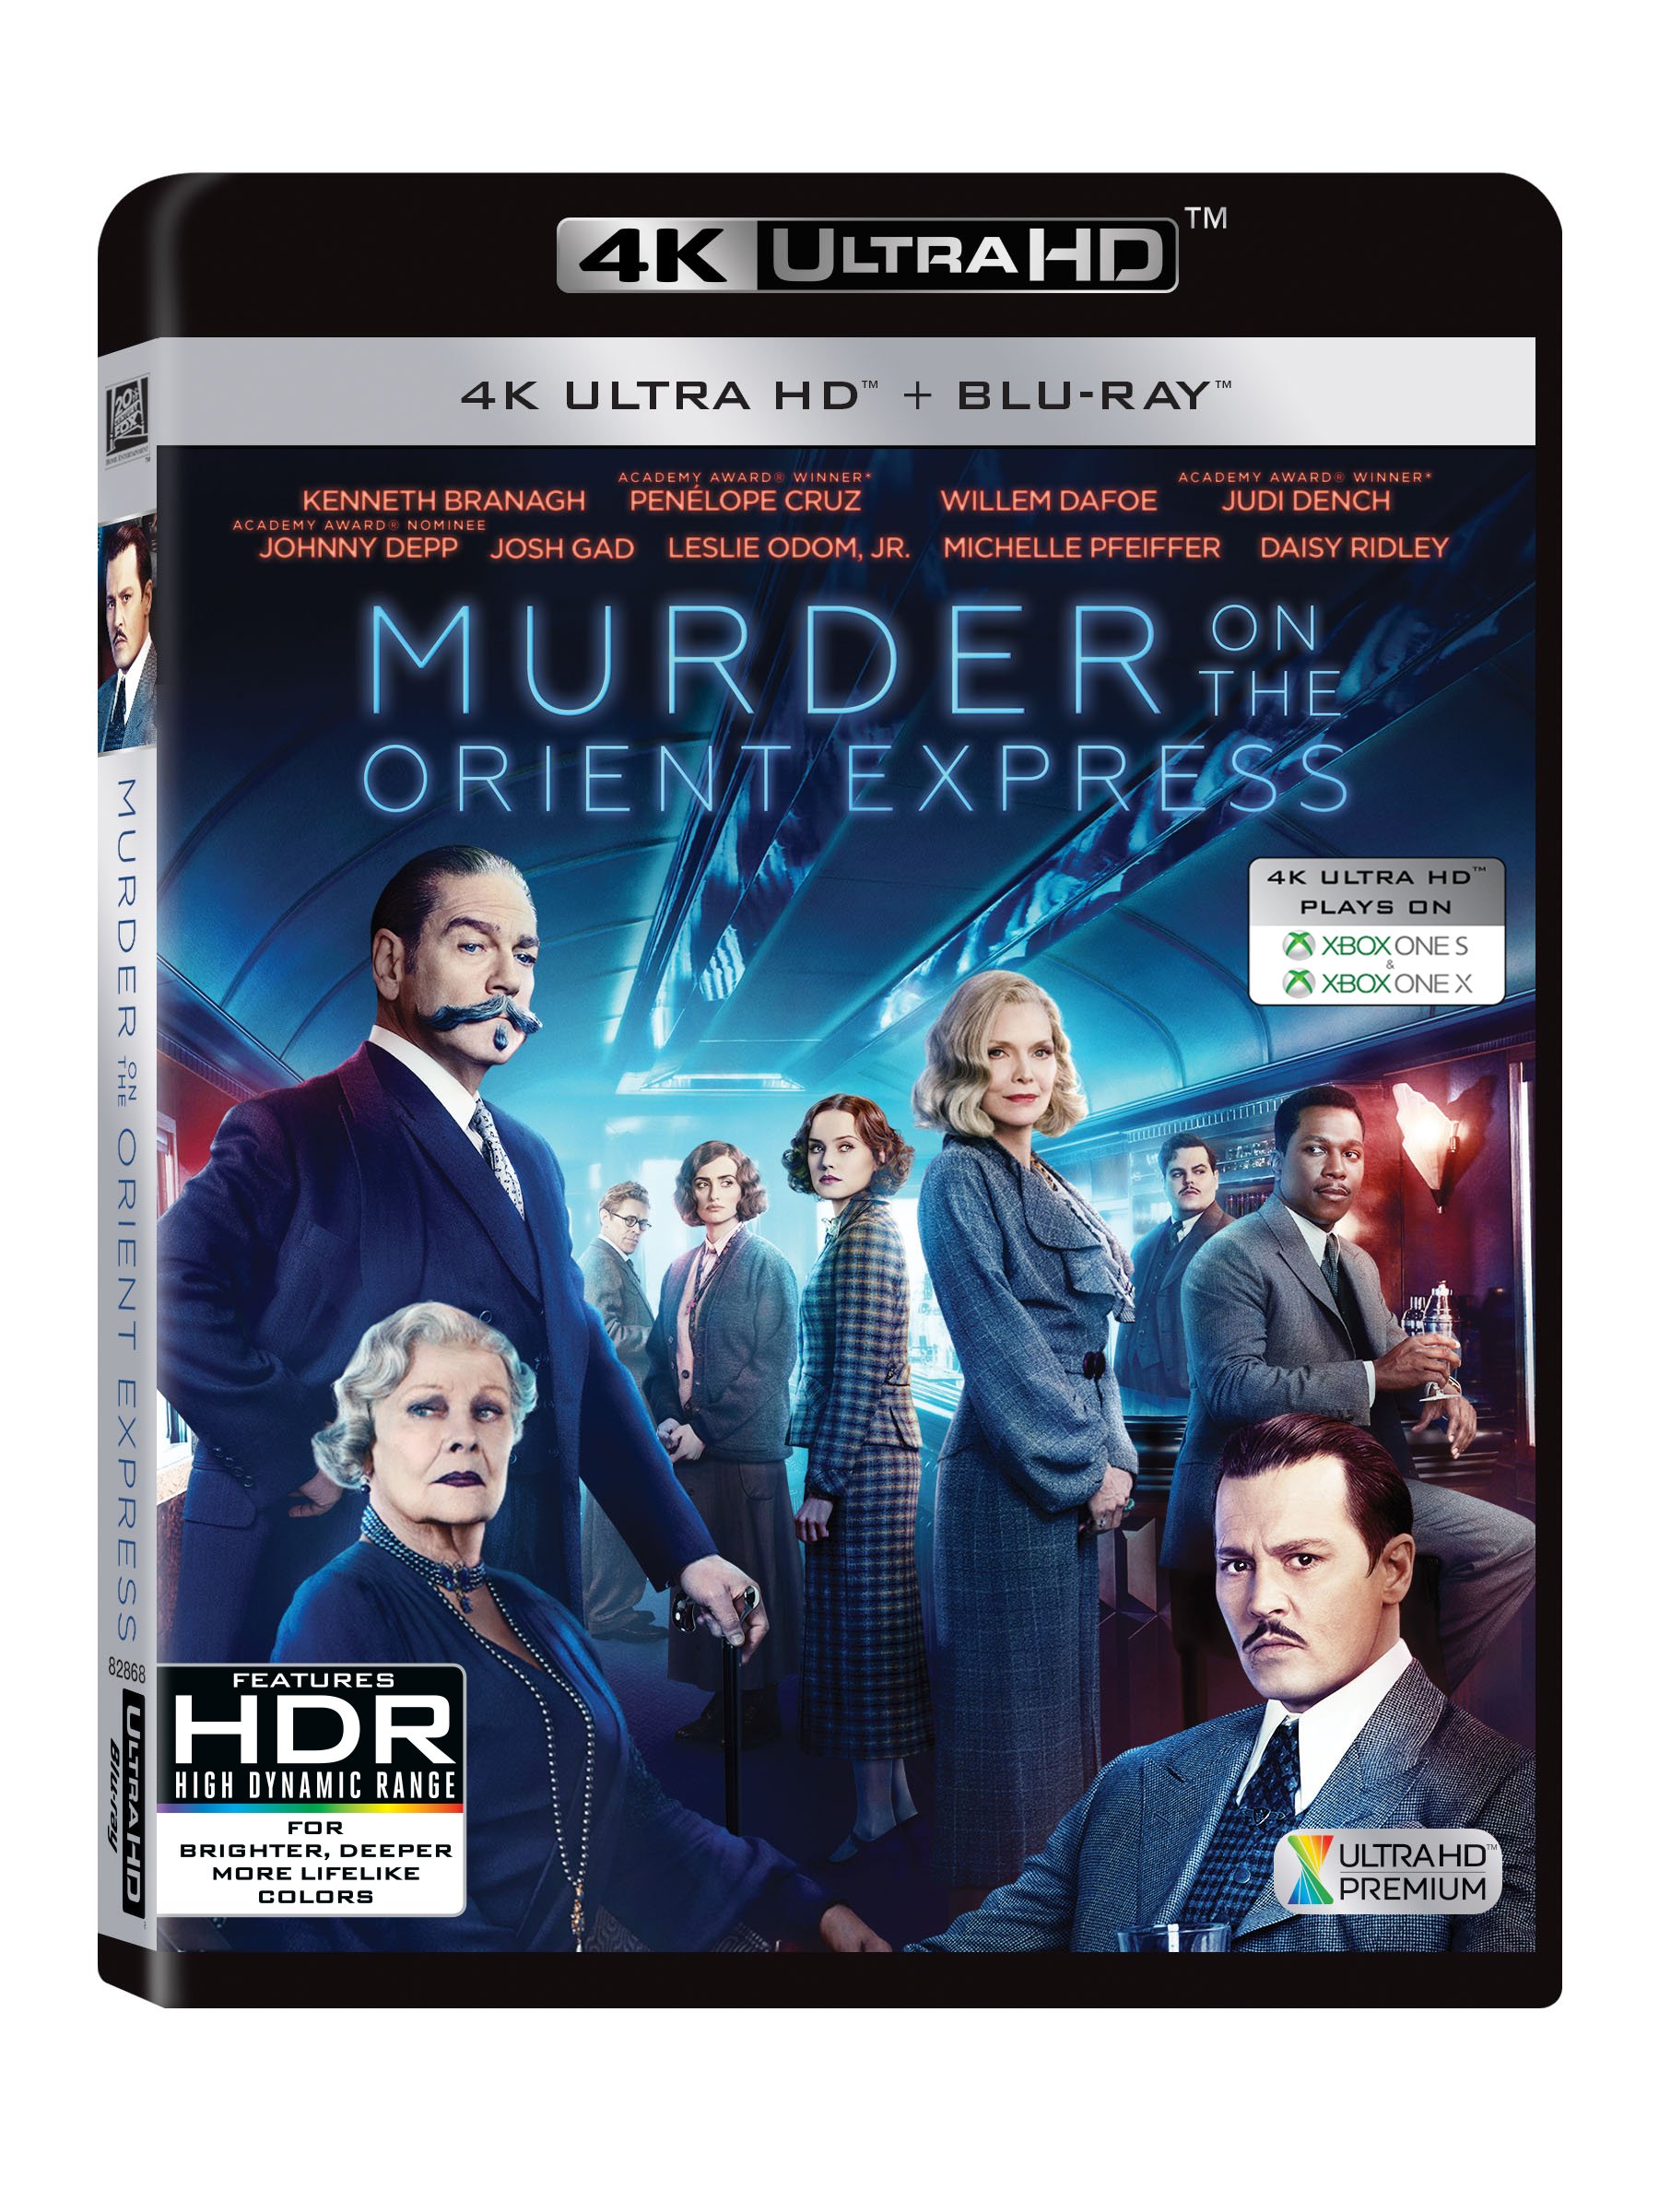 murder-on-the-orient-express-4k-uhd-hd-2-disc-movie-purchase-or